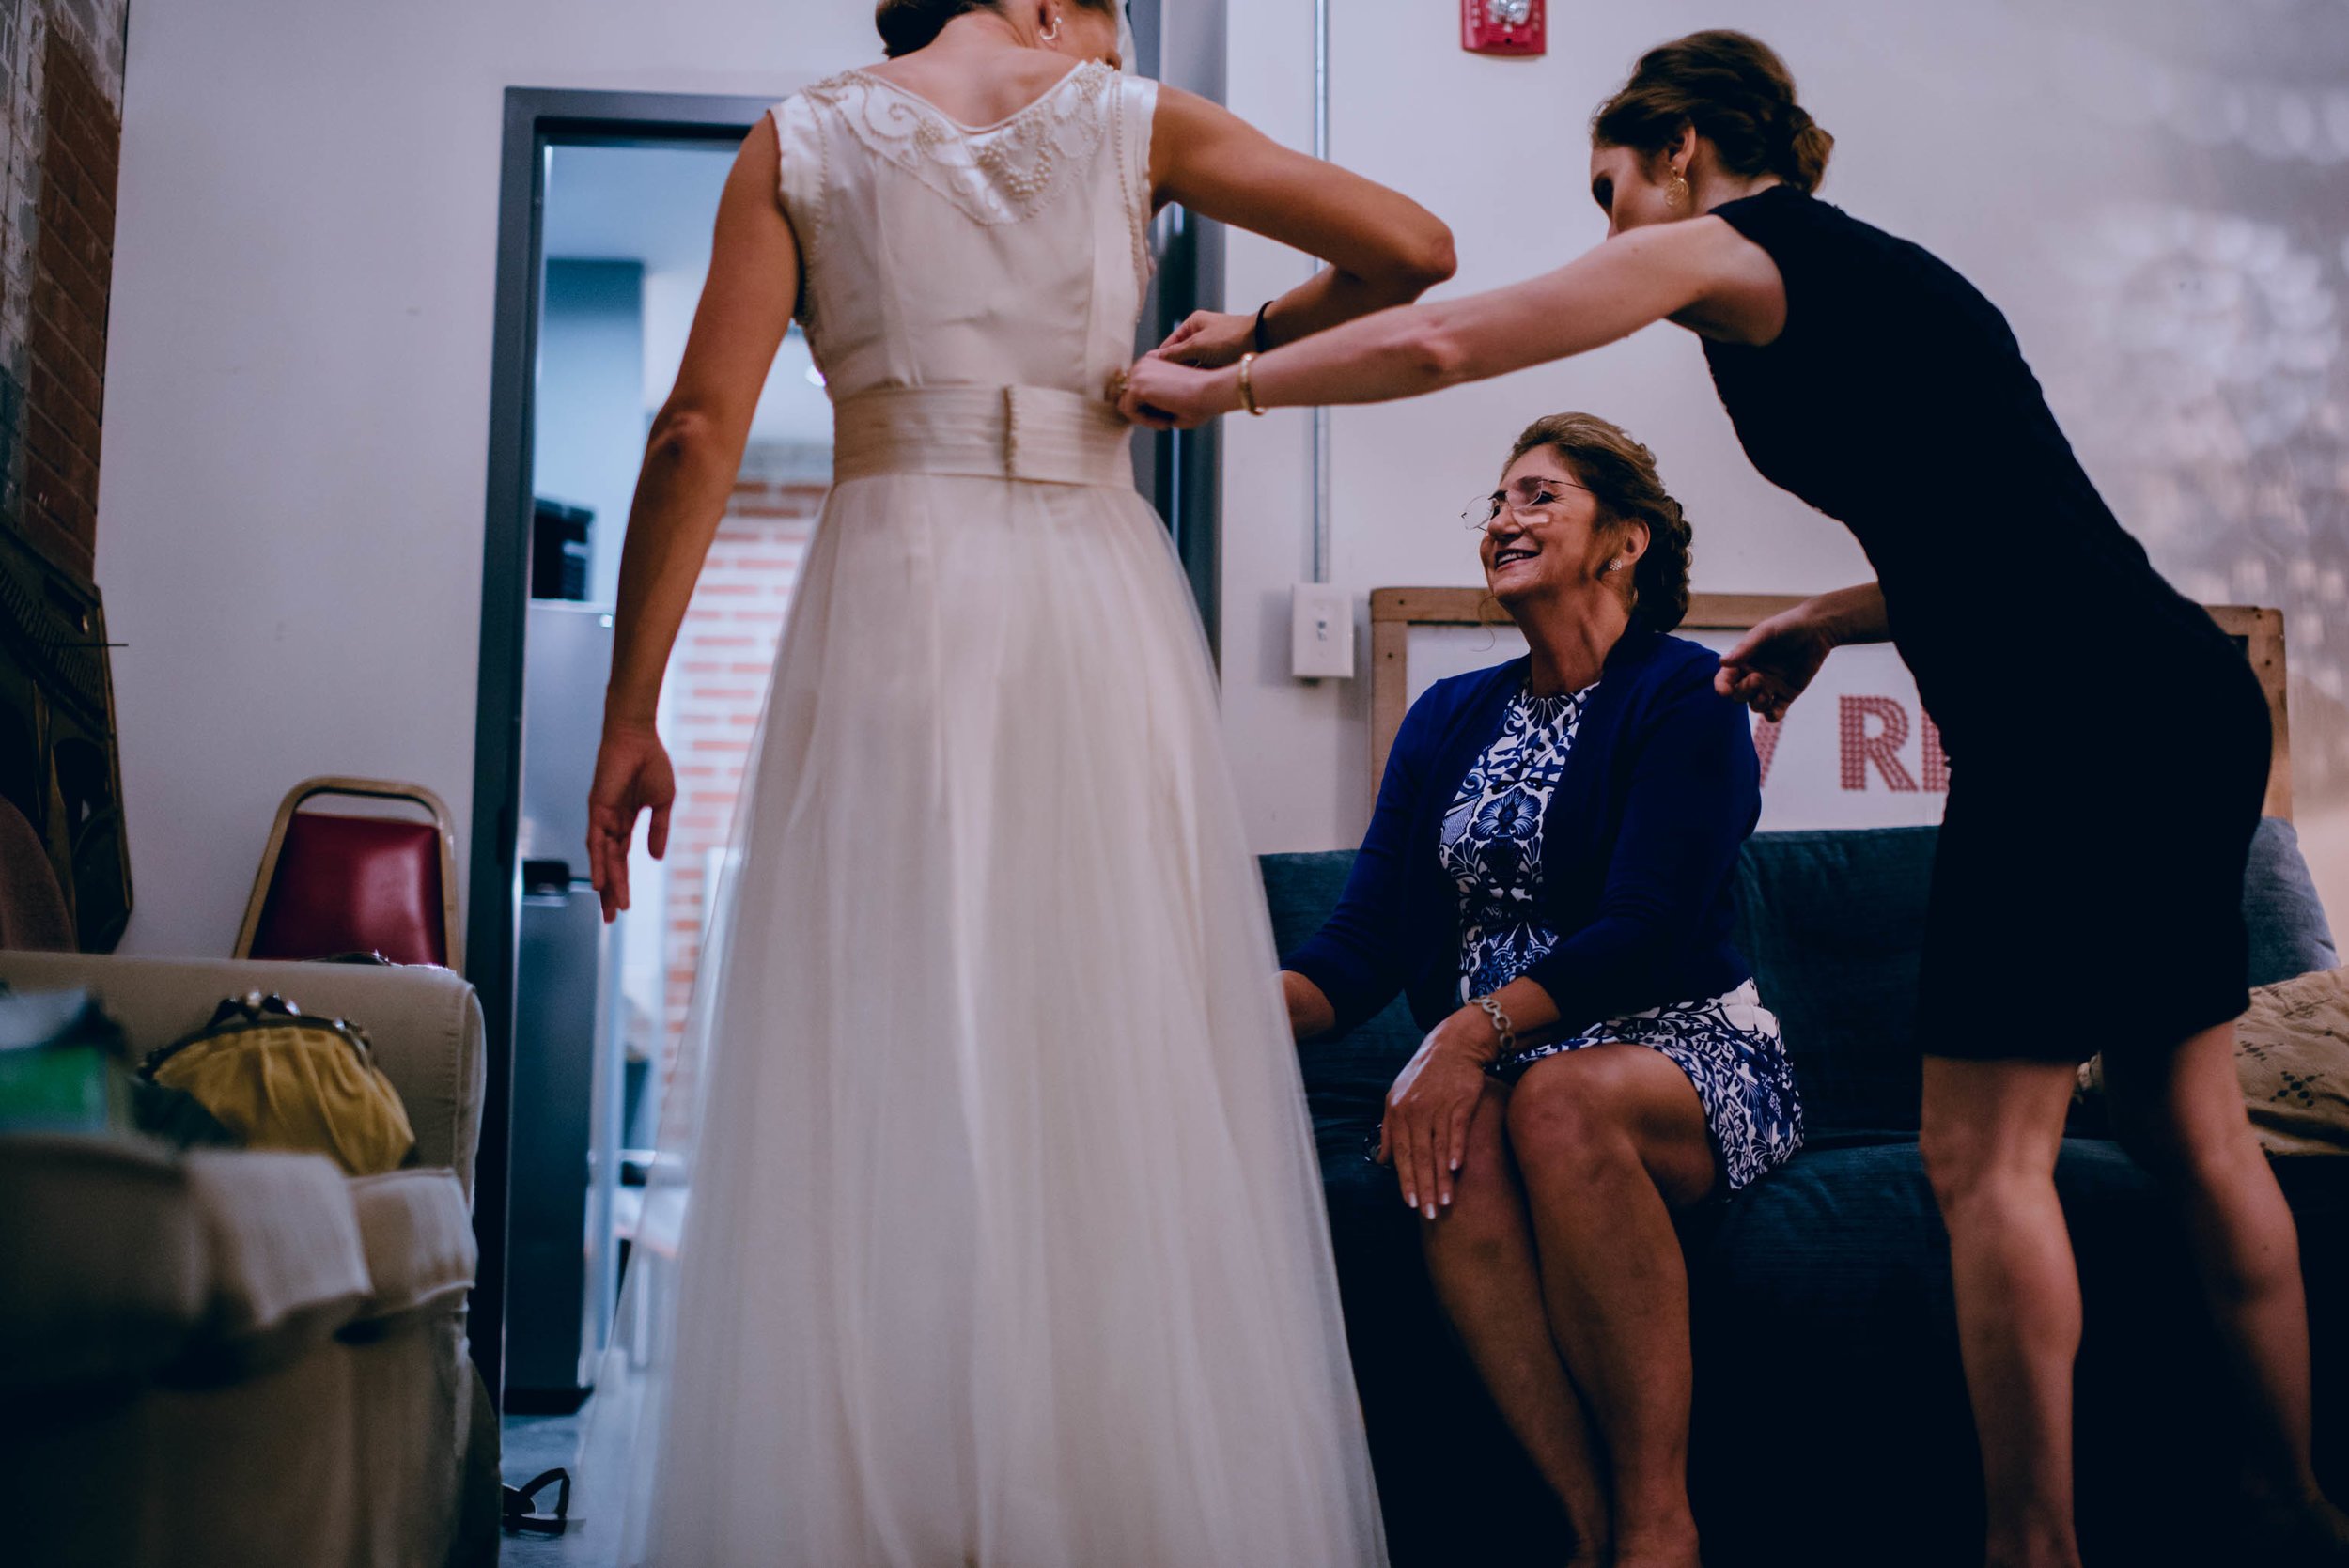 finishing touches of getting bride ready in her wedding dress